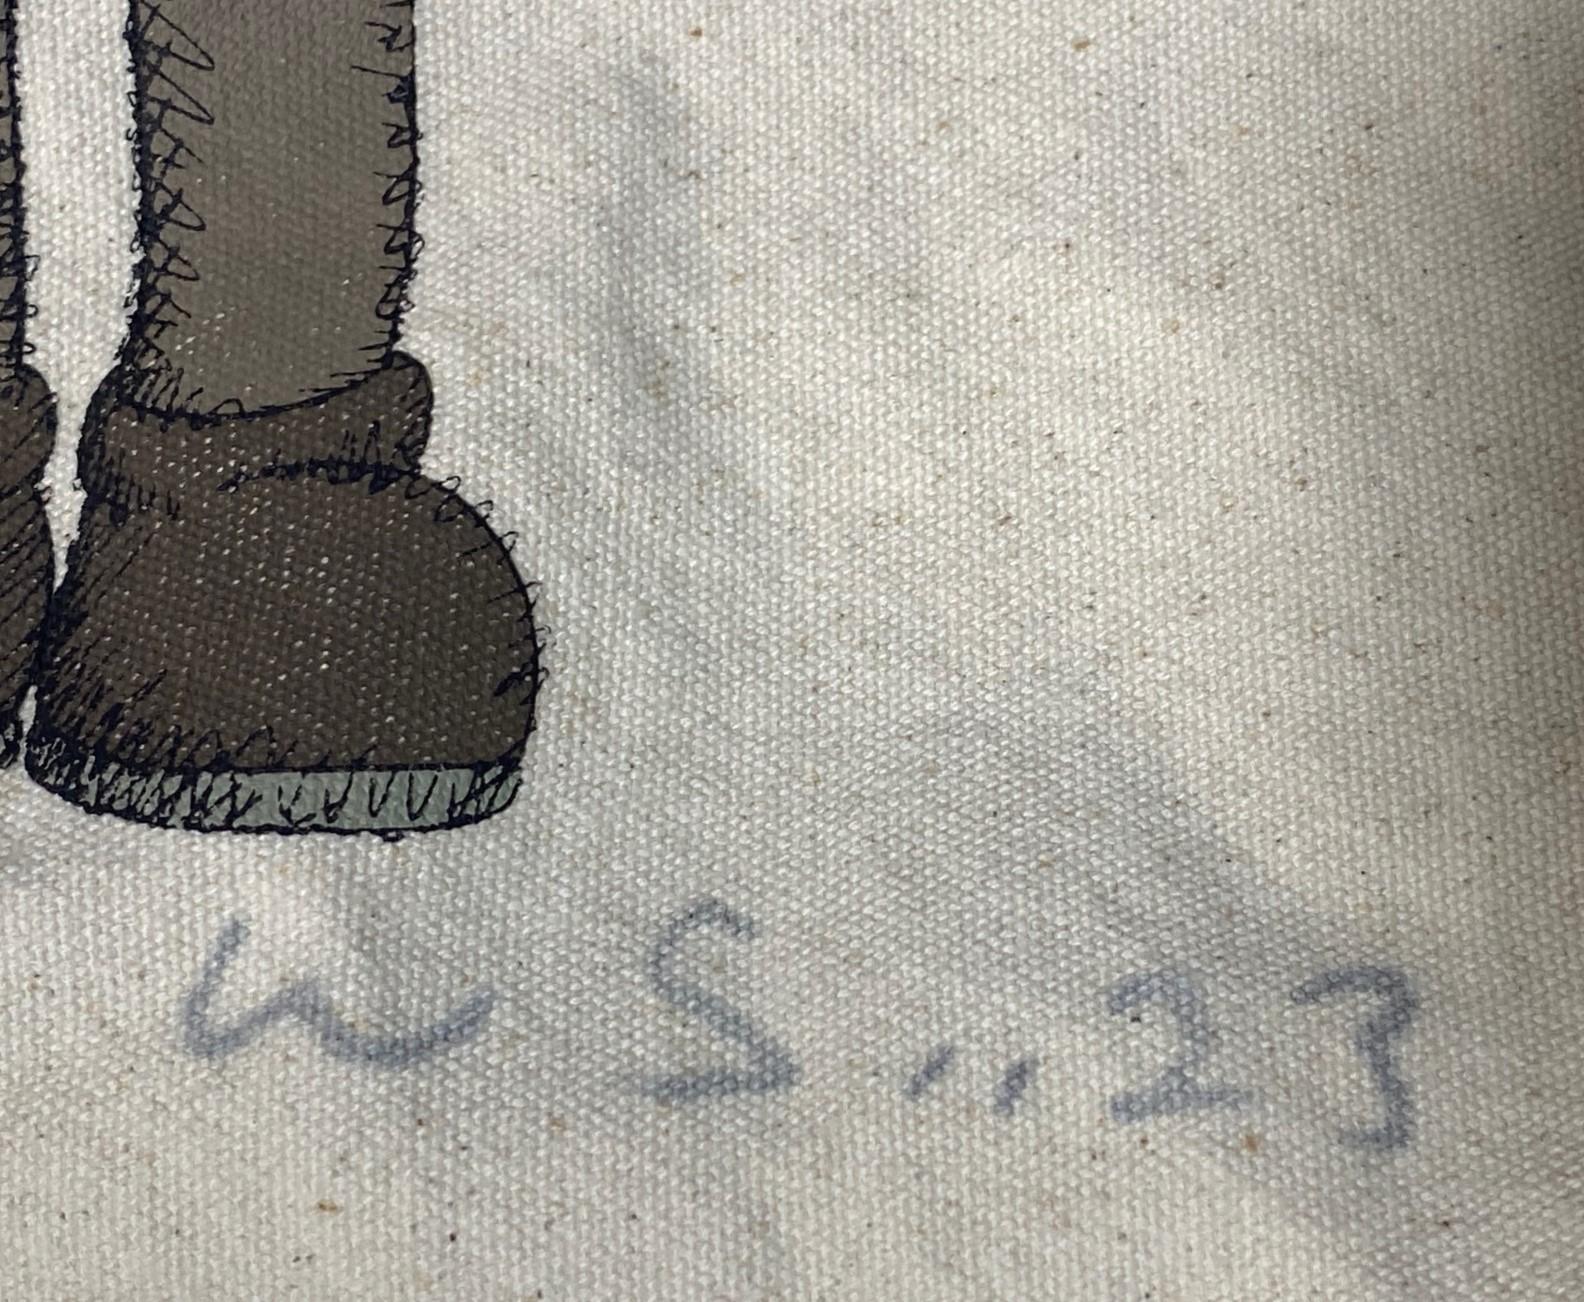 KAWS Brian Donnelly Rare Signed Natural Canvas Uniqlo X Tote Shopping Bag Gone For Sale 2